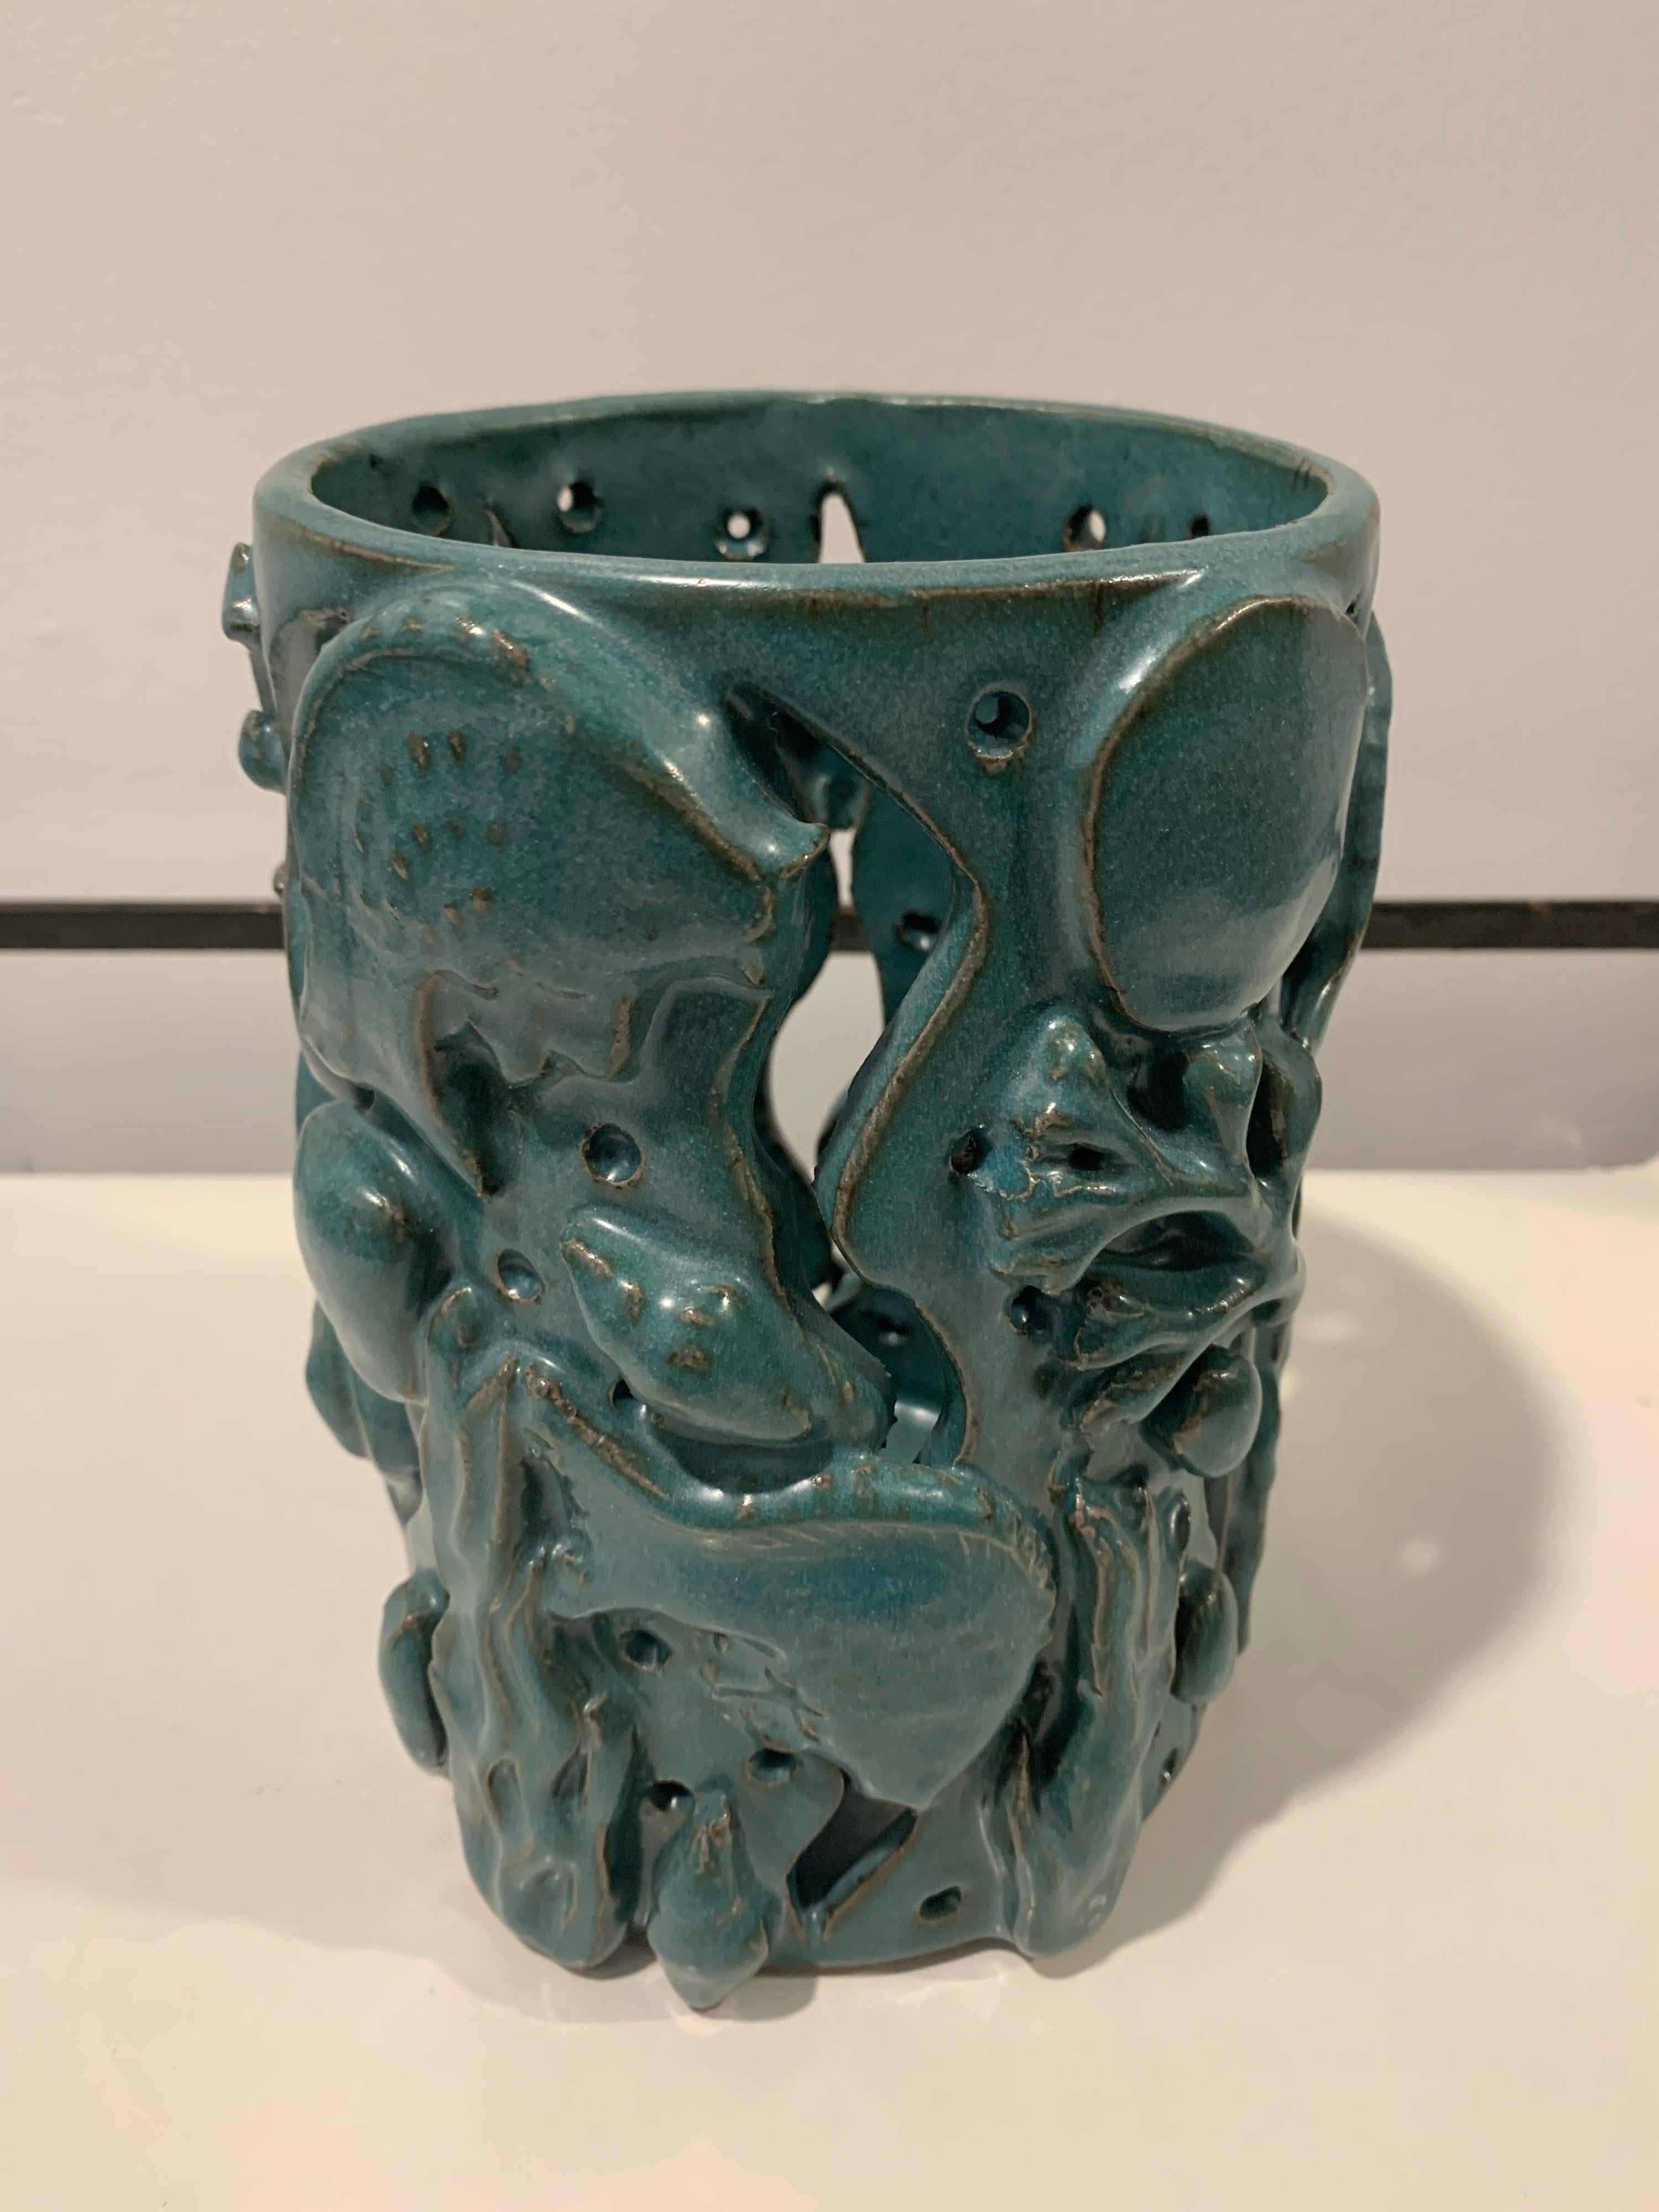 This beautiful handmade pottery vessel for orchids, brush holder, etc., with an “Aquarium” theme. Fish and marine plants throughout this amazing turquoise piece.